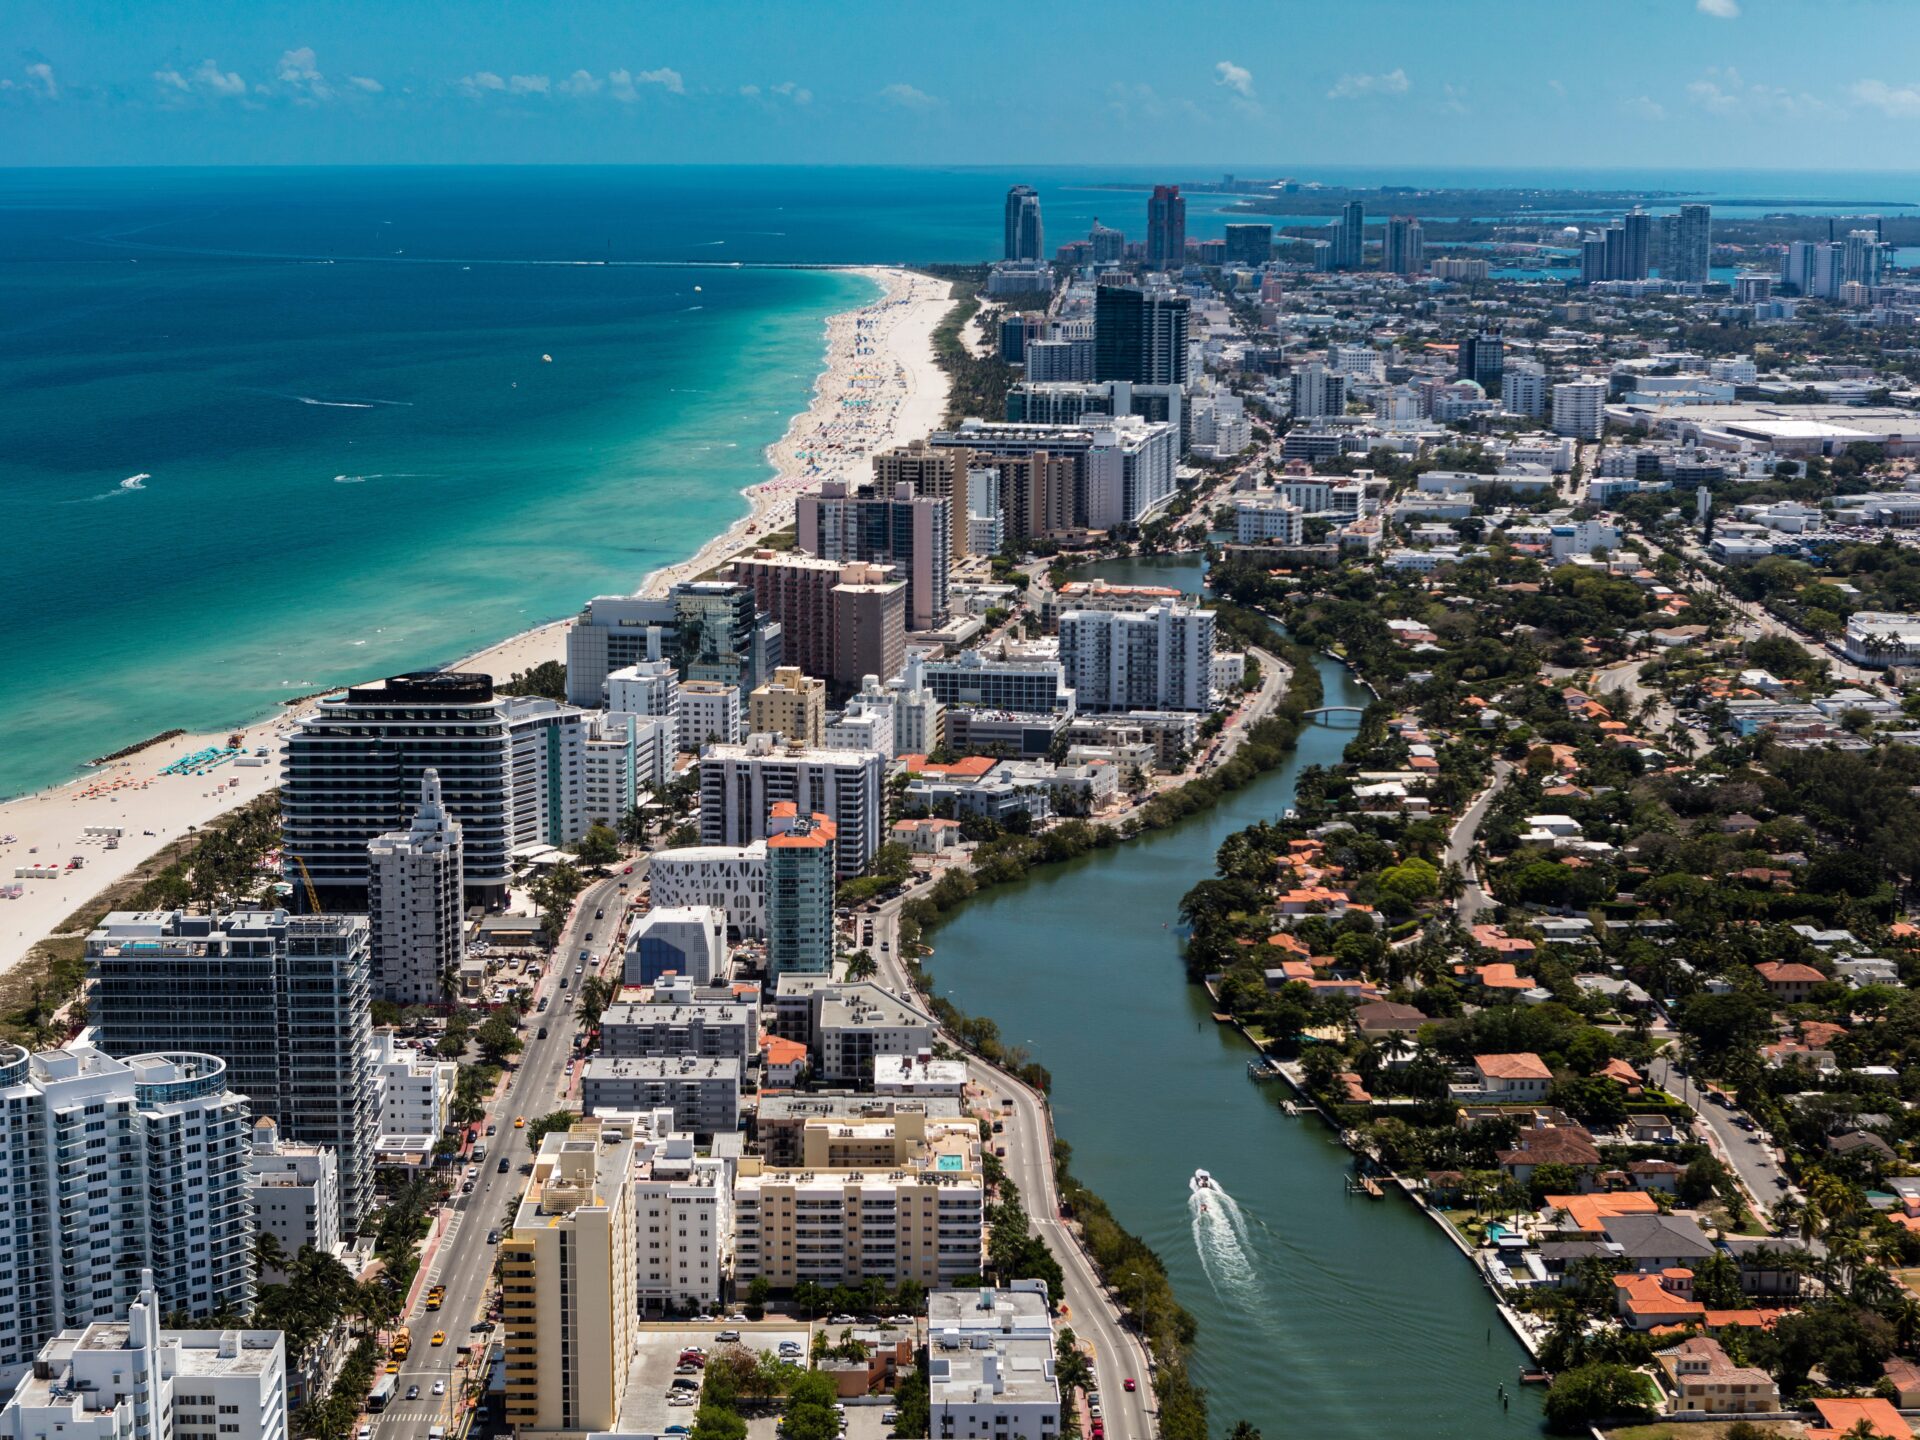 Wall Street and money moved into South Florida, driving up prices. Now some residents want to move out.